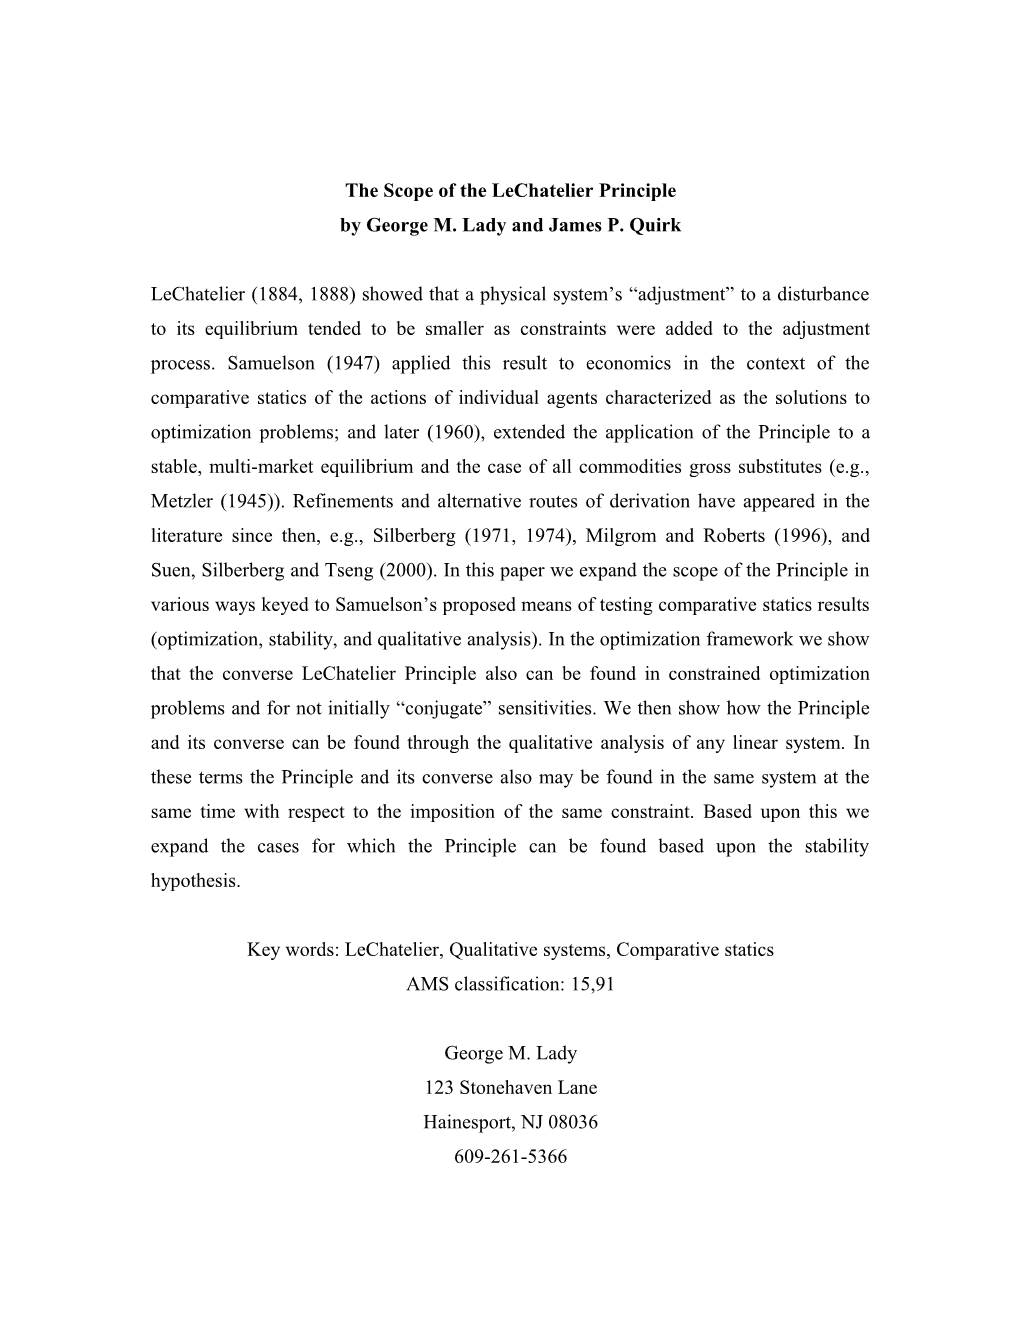 The Scope of the Lechatelier Principle